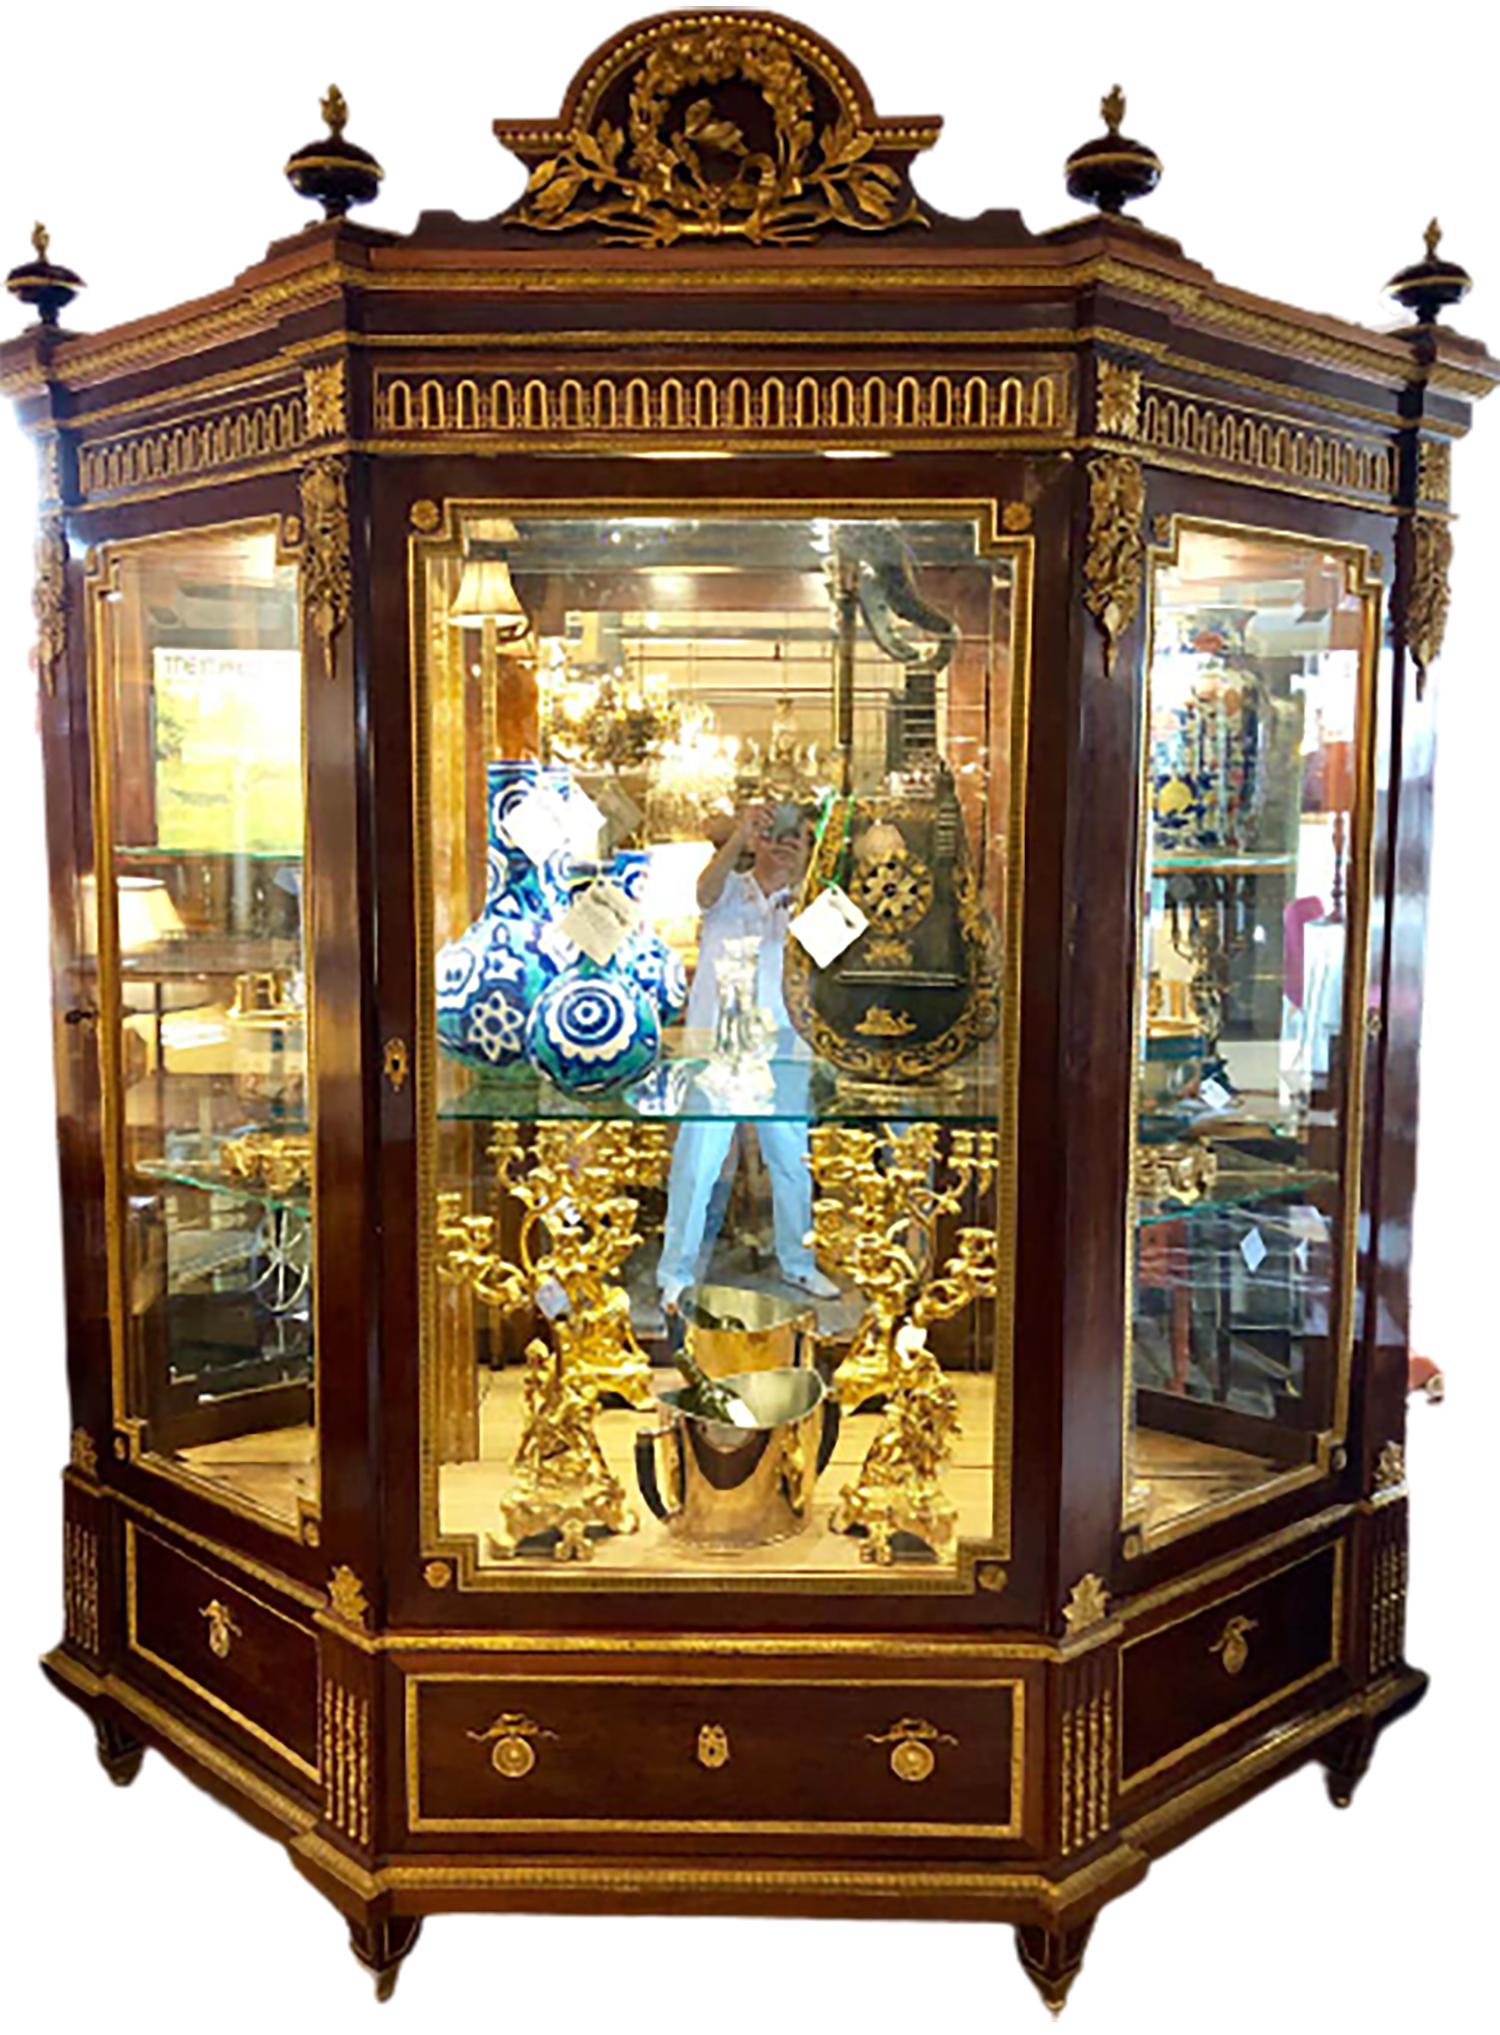 19th century link quality mahogany vitrine cabinet having spectacular bronze mounts stamped Grohe. This Important and Impressive Louis XVI style cabinet is larger than life as it can sit center stage in any room or office. The full beveled glass